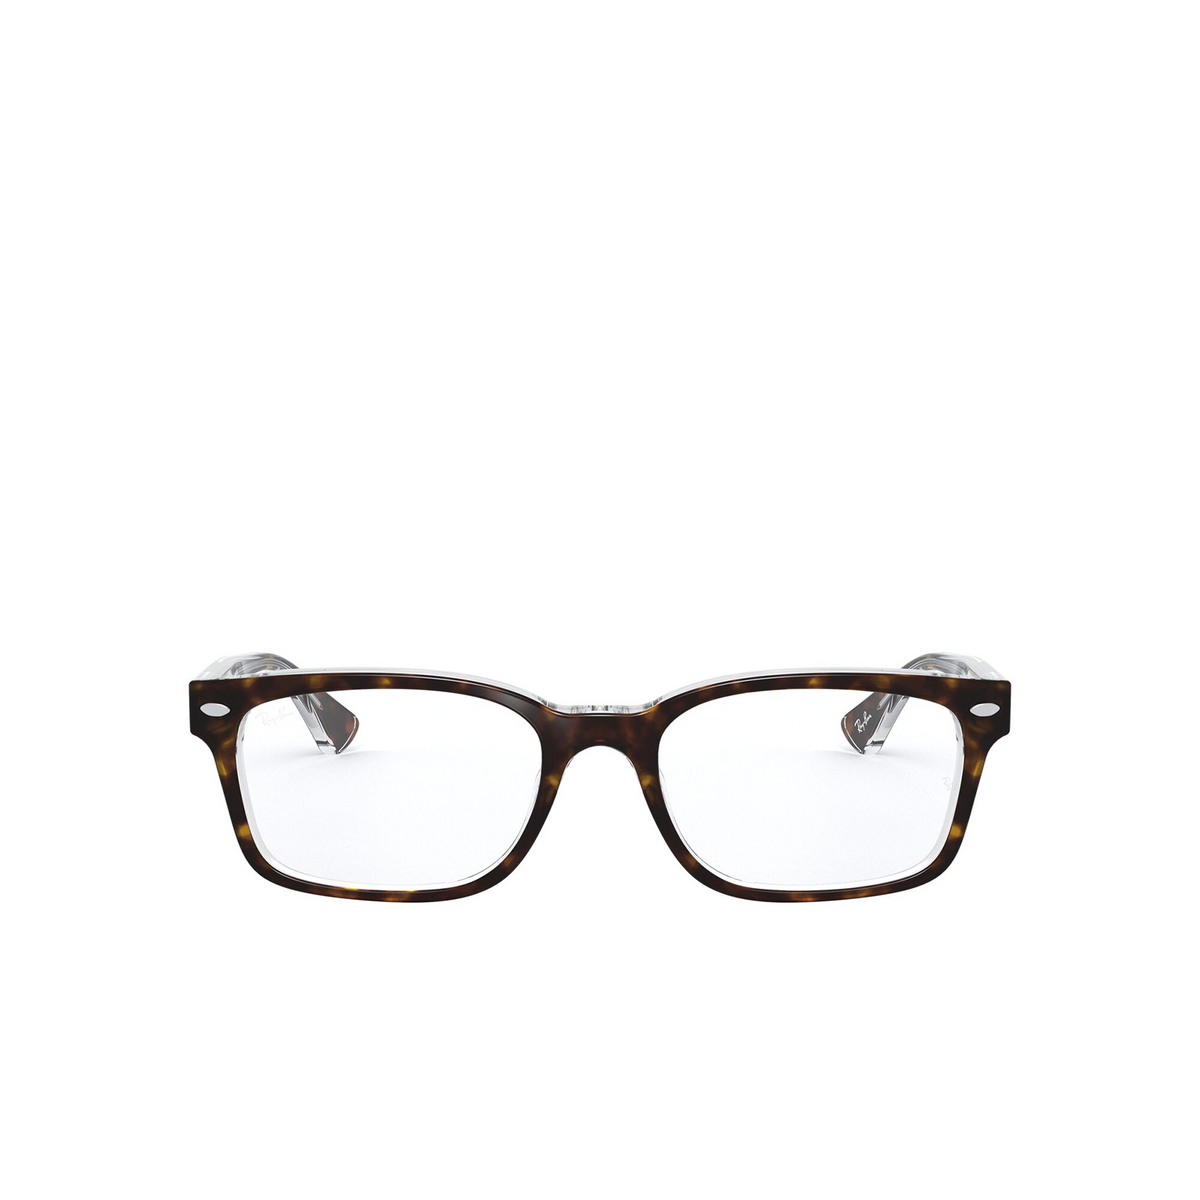 Ray-Ban RX5286 Eyeglasses 5082 Havana On Transparent - front view